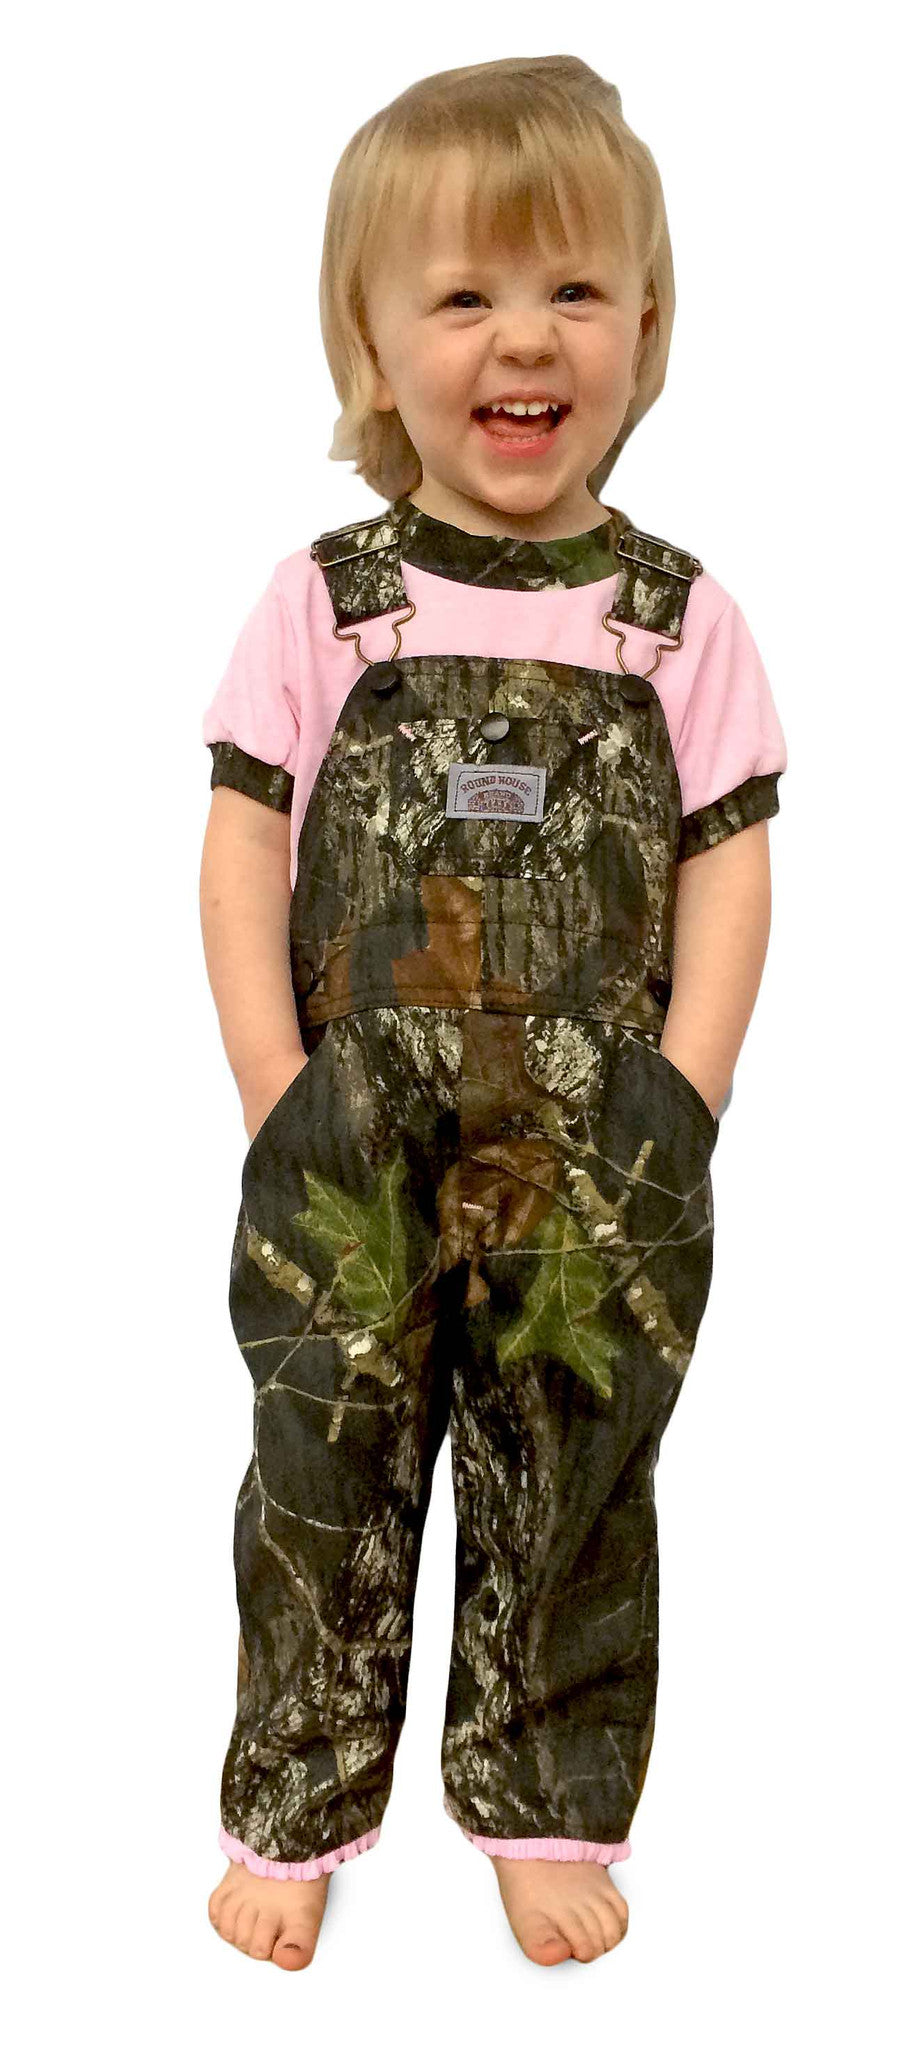 #428 Premium Pink Ruffle BIB OVERALL Girls in Realtree or Mossy Oak Break-Up Made in USA